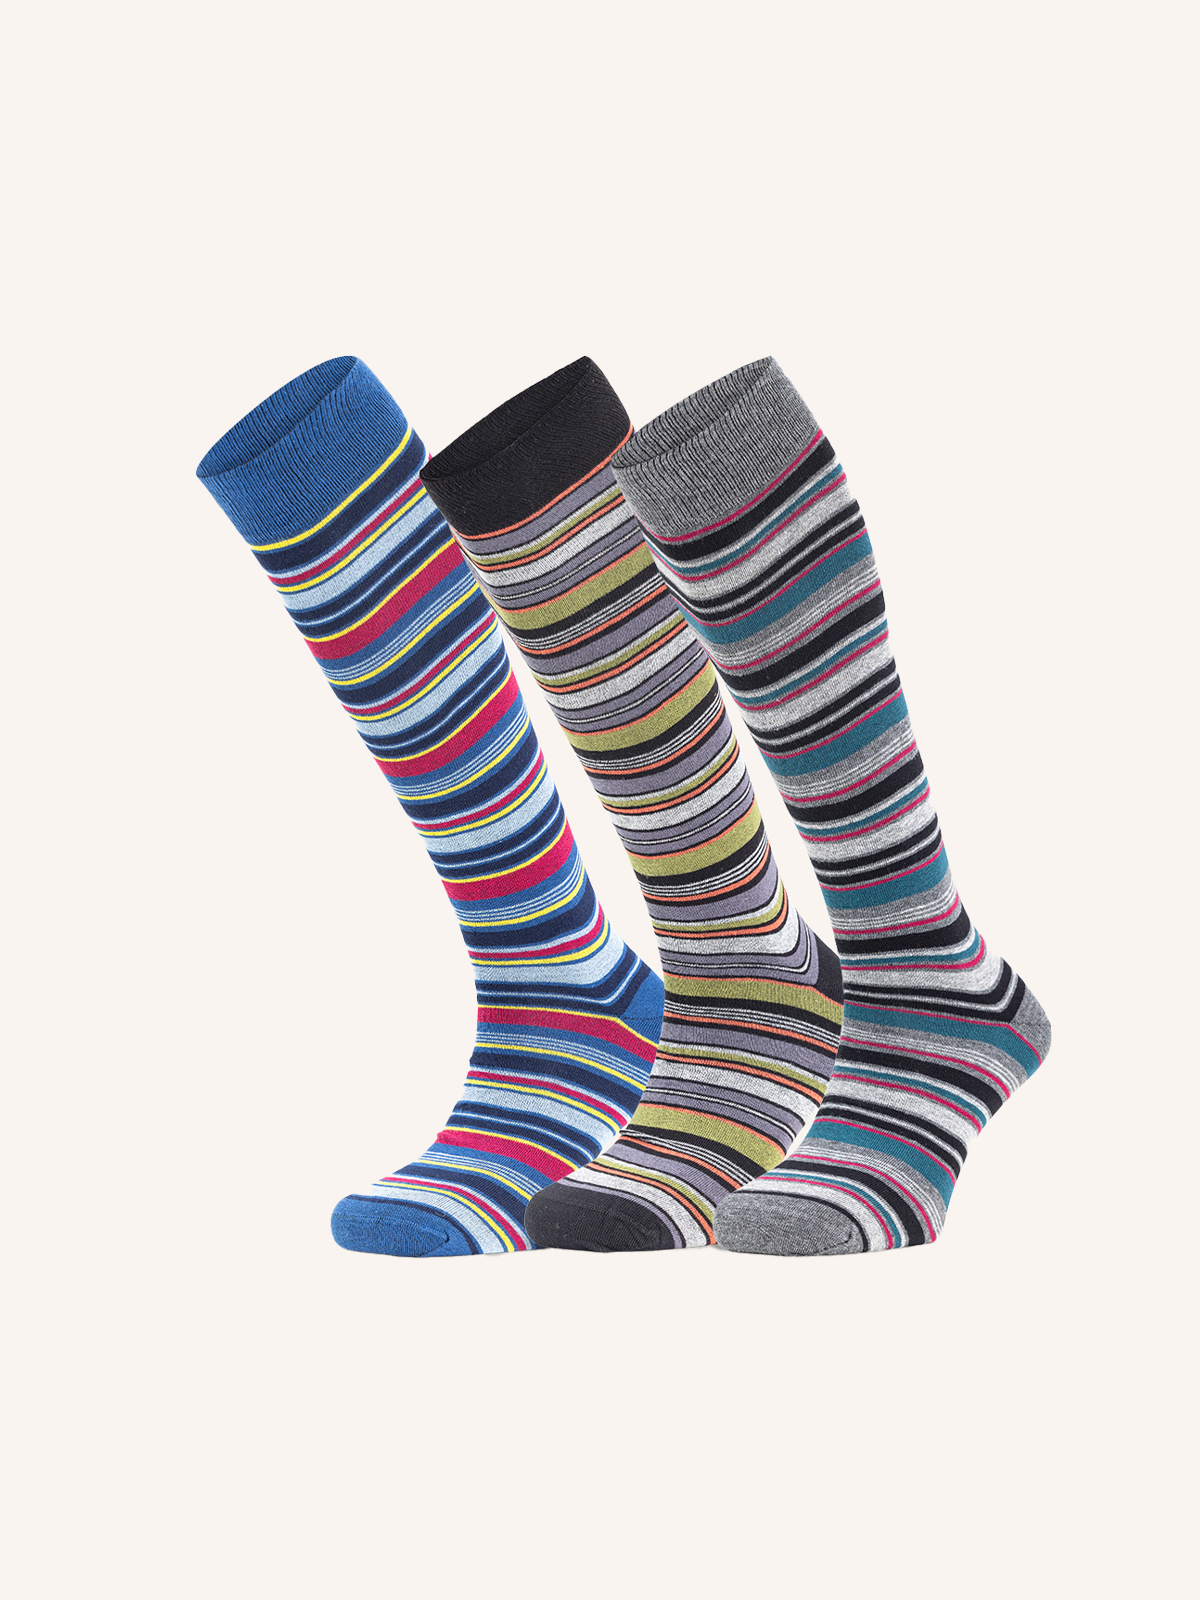 Long Combed Cotton Sock for Men | Fantasy | Pack of 3 pairs | Bruce L